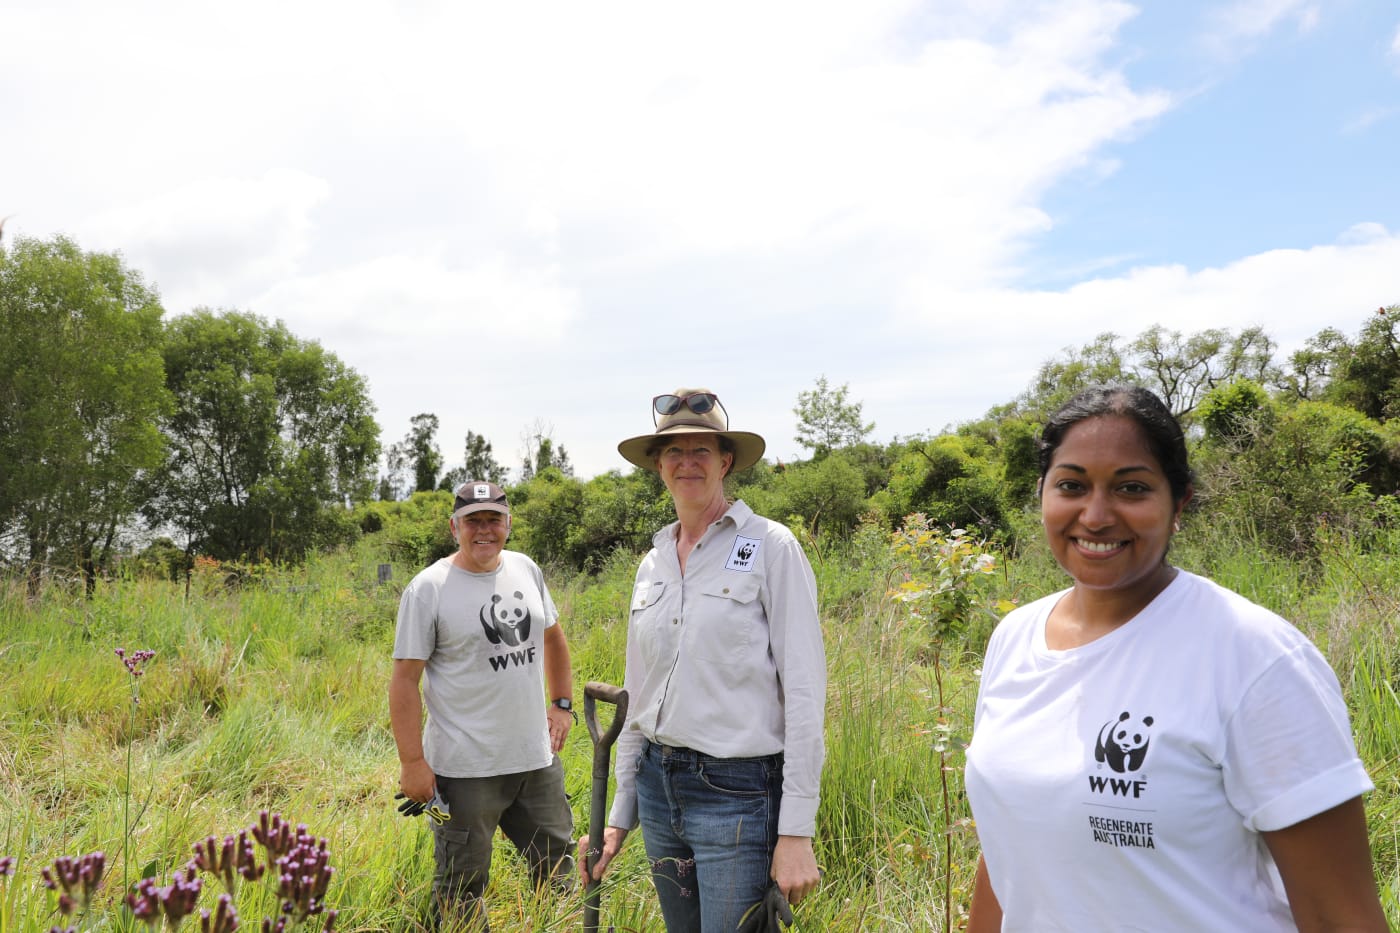 Tanya Pritchard, Darren Grover and Prishani Vengetas at a tree planting event with our partners at Envite in Swan Bay, NSW.